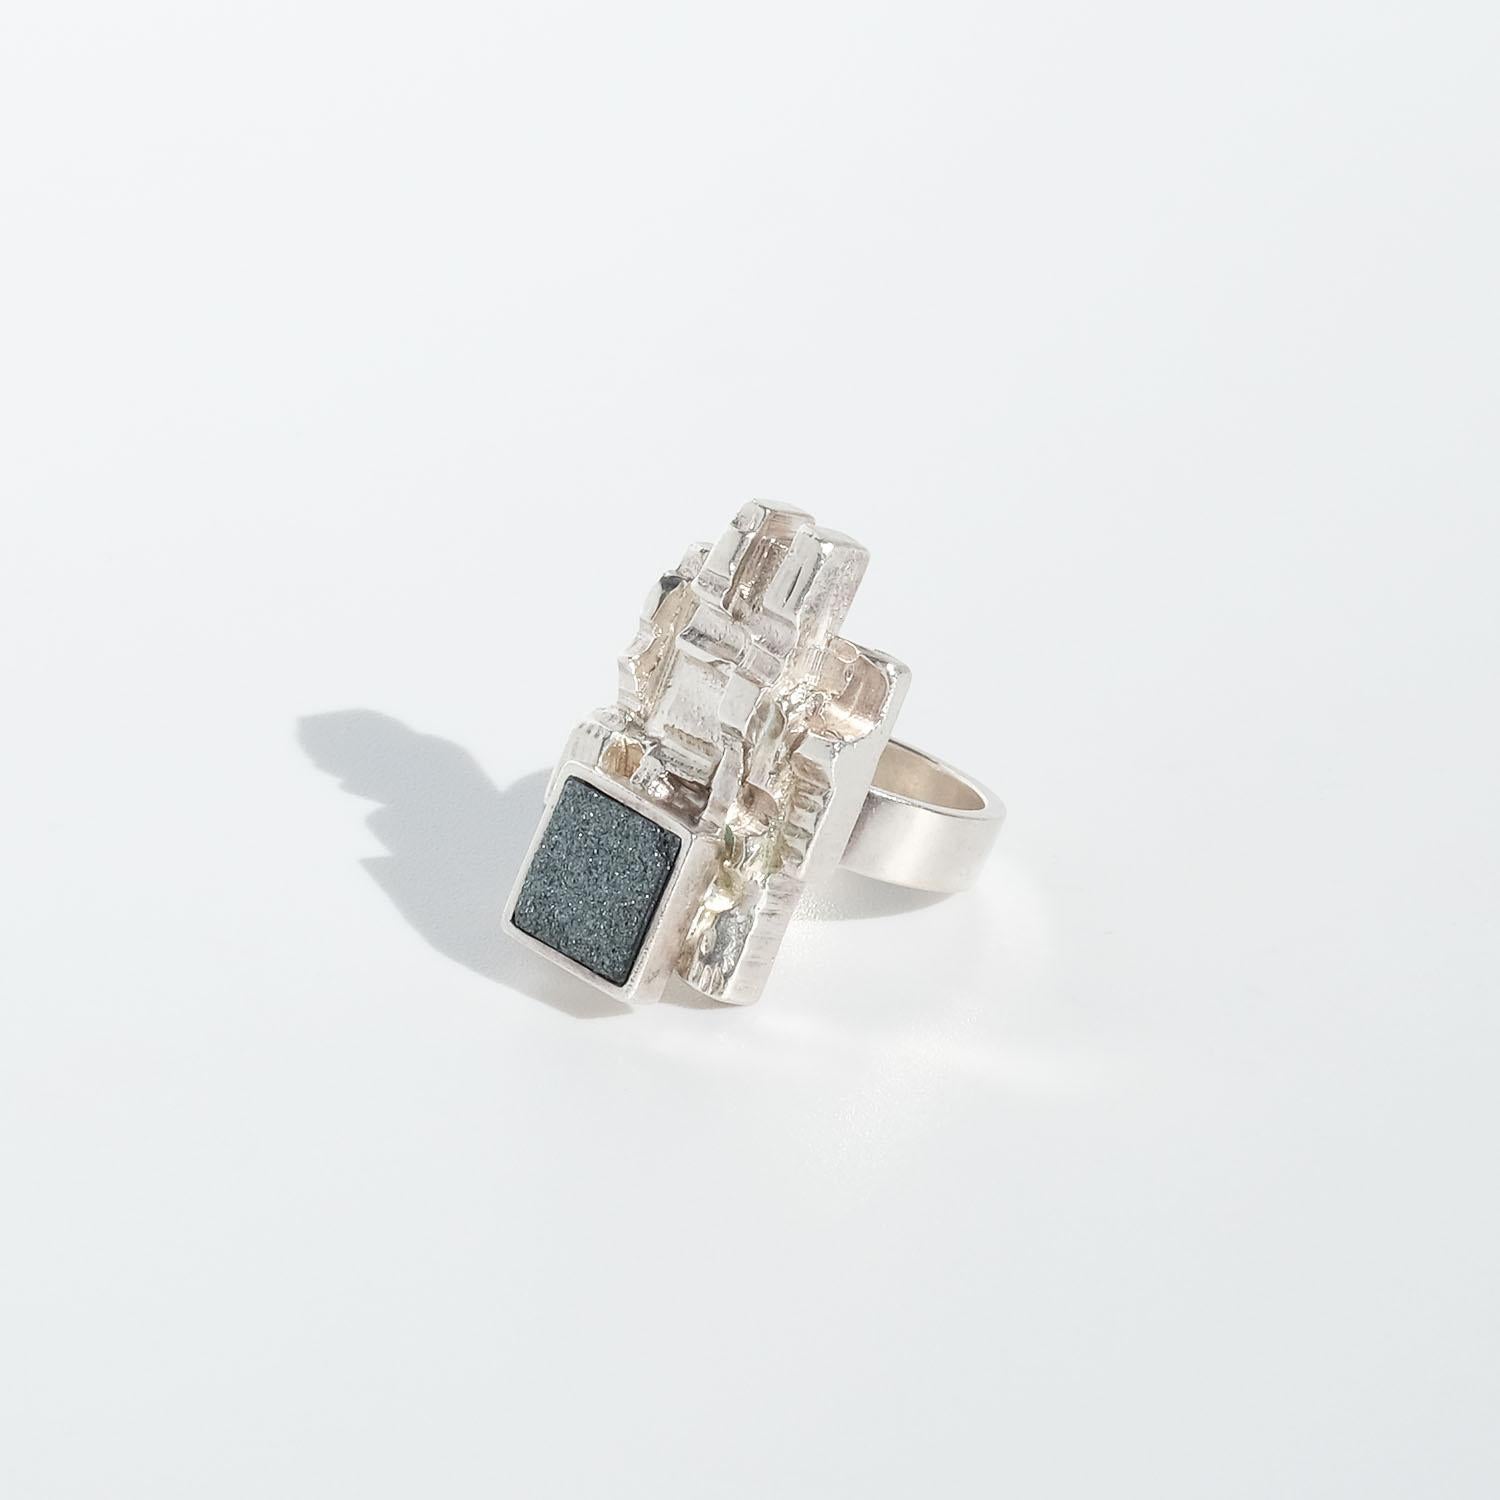 Vintage Silver and Black Stone Ring by Swedish Master Claës Giertta made 1977 For Sale 6